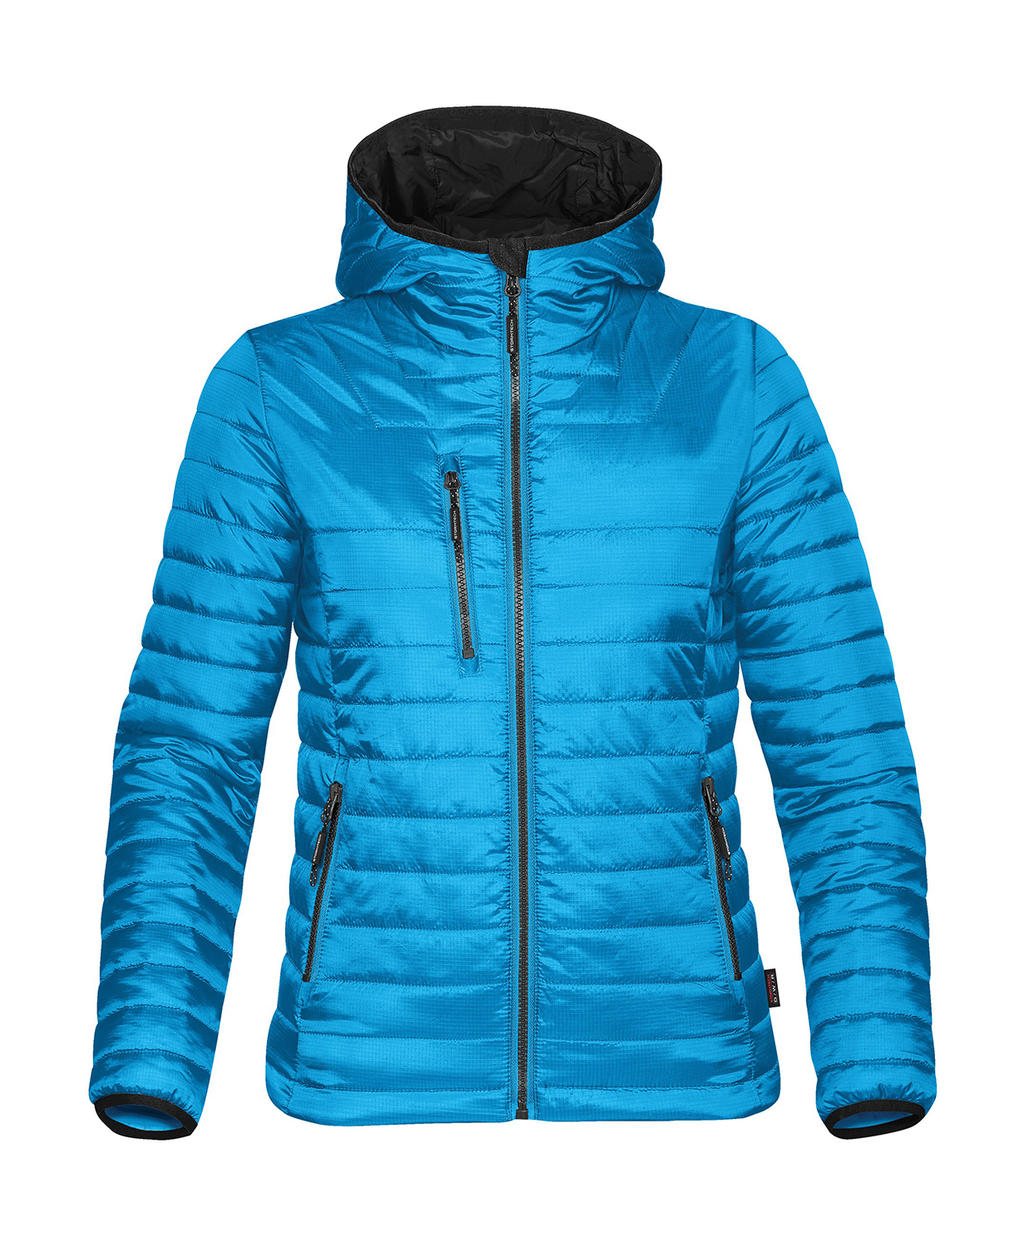  Womens Gravity Thermal Jacket in Farbe Electric Blue/Black